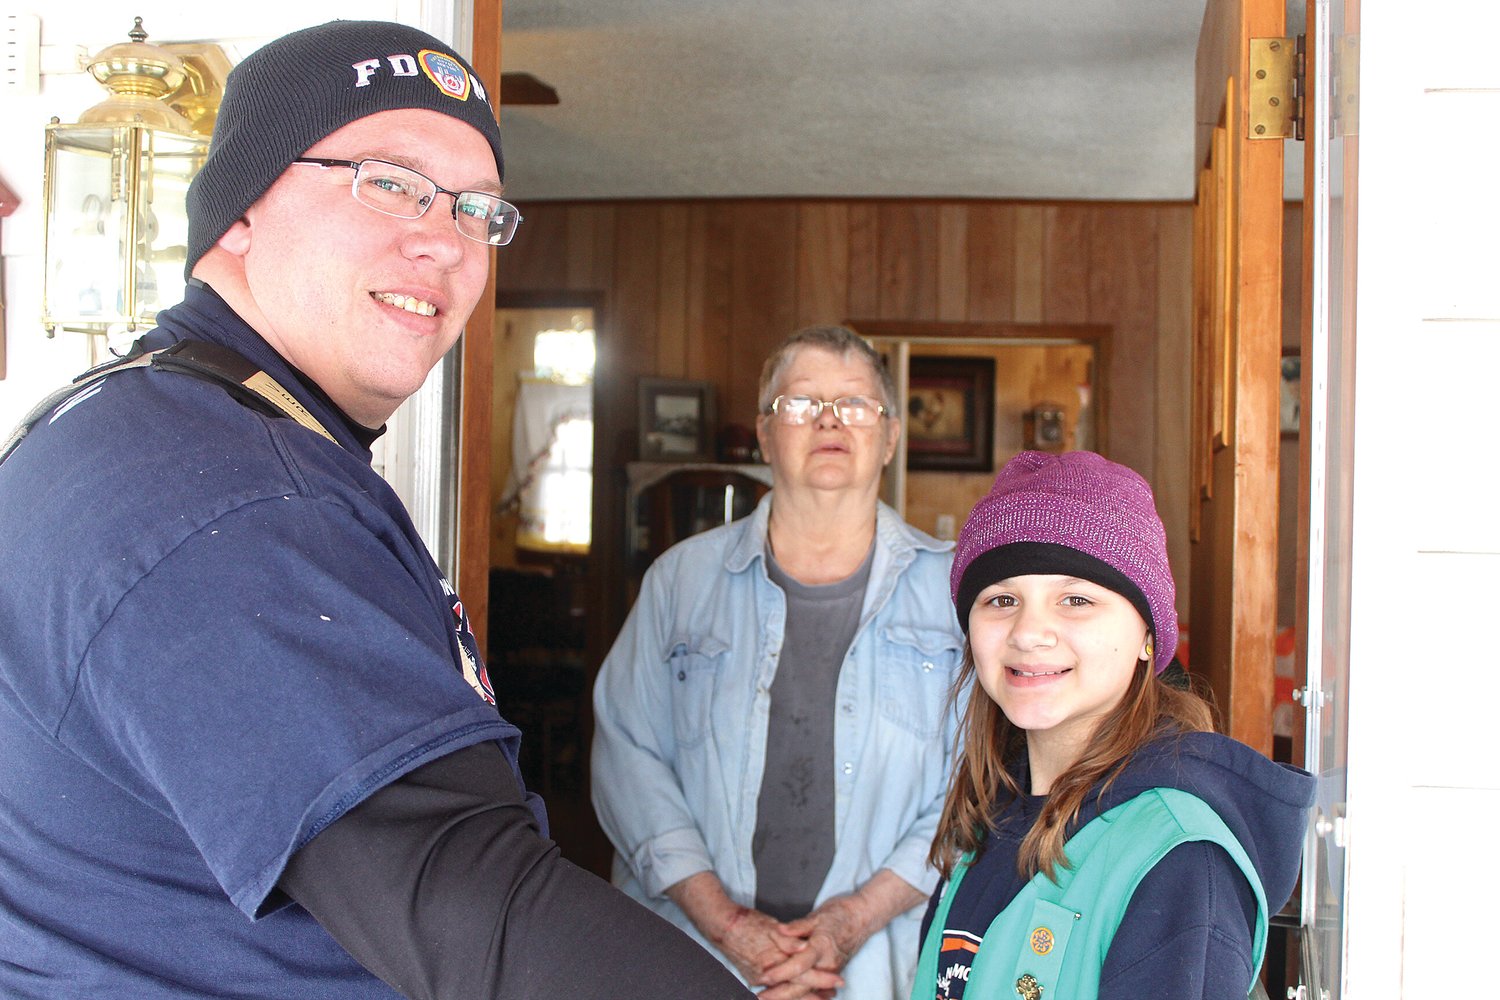 Waynetown resident Linda Wooten, center, receives a free box of Girl Scout cookies Saturday courtesy of the Waynetown Volunteer Fire Department, which purchased $500 of the annual treats for the elderly. Firefighter Ryan Clevinger, left, and Scout Elizabeth Ellingwood deliver the cookies personally.